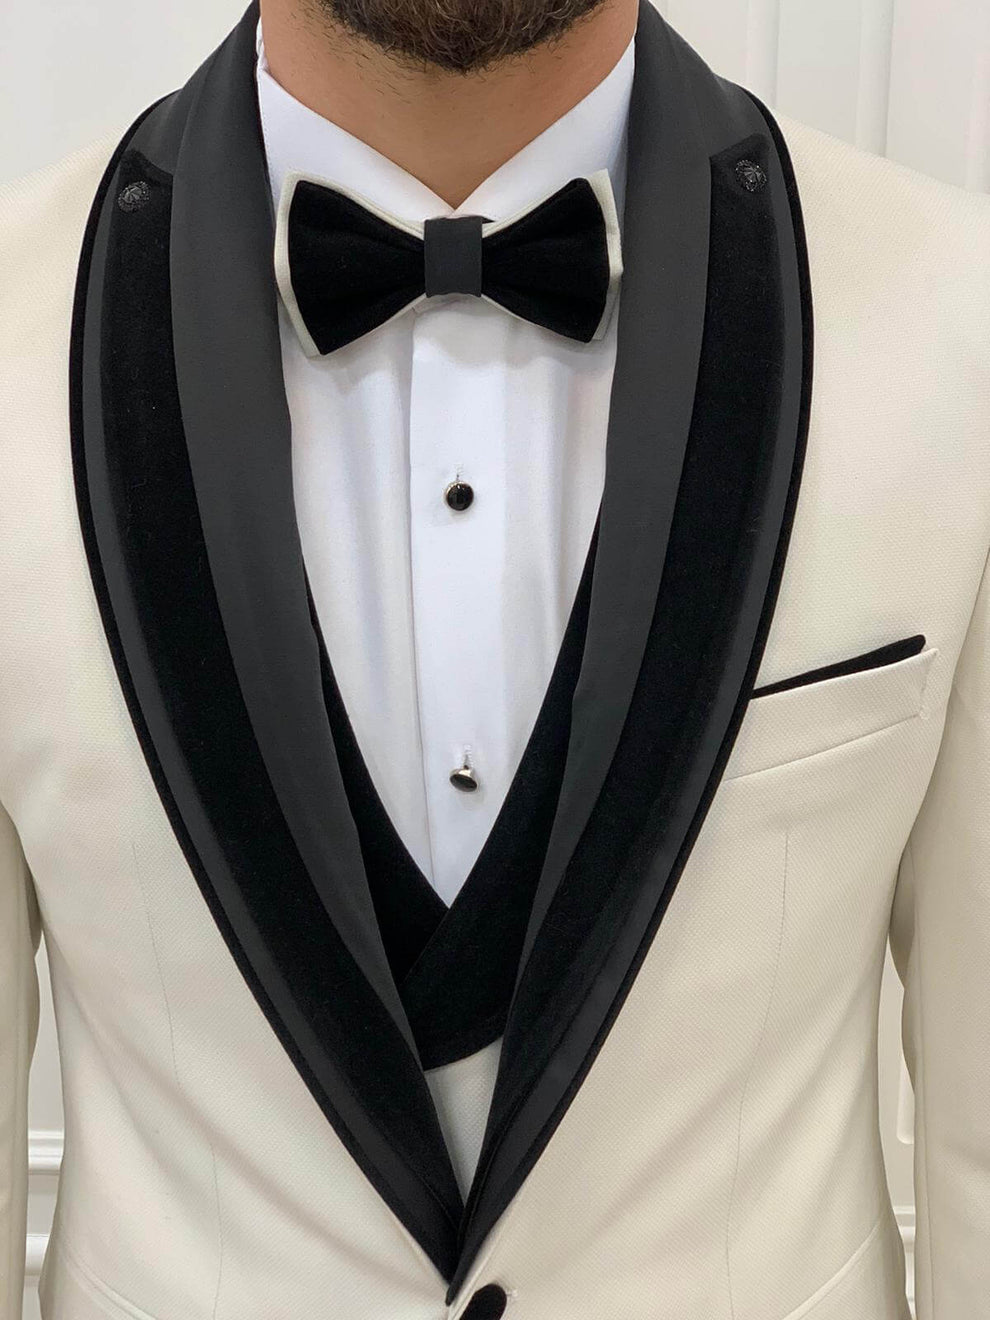 Timeless Style for Your Special Day: White Tuxedo for Prom & Weddings ...